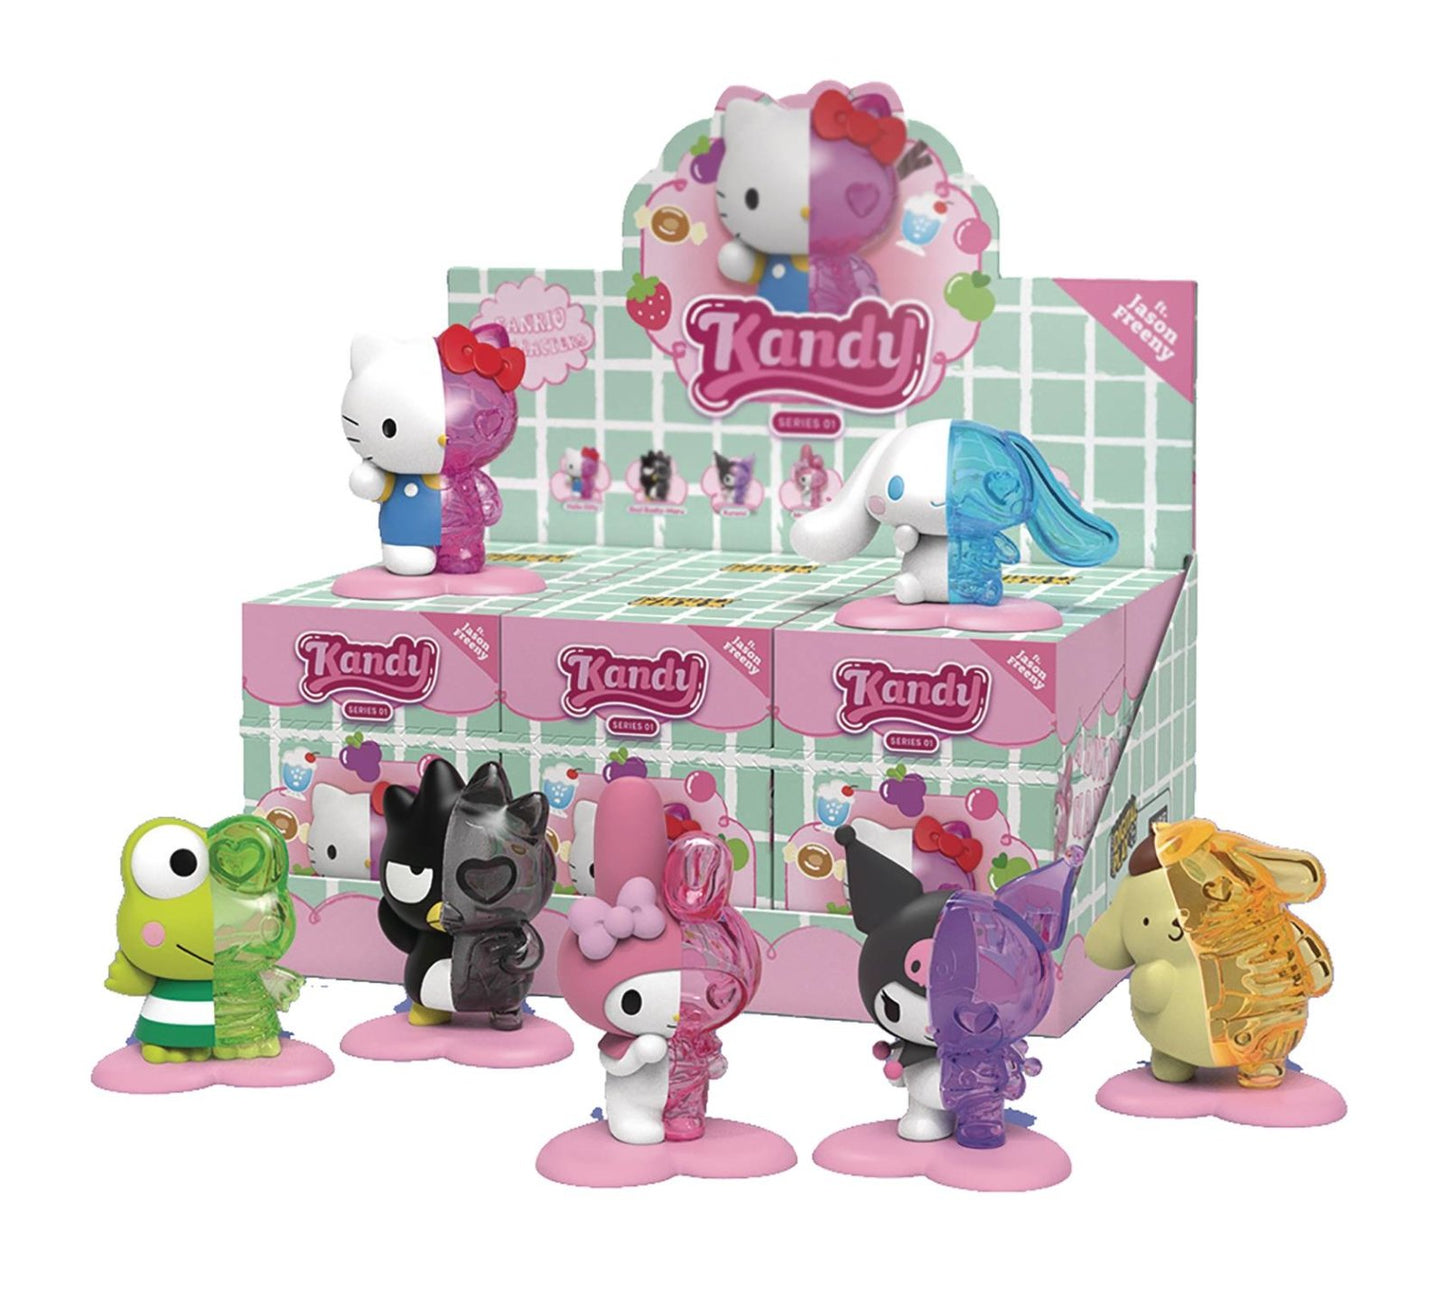 Kandy X Sanrio (Featuring Jason Freeny): Blind Box Figure - The Fourth Place